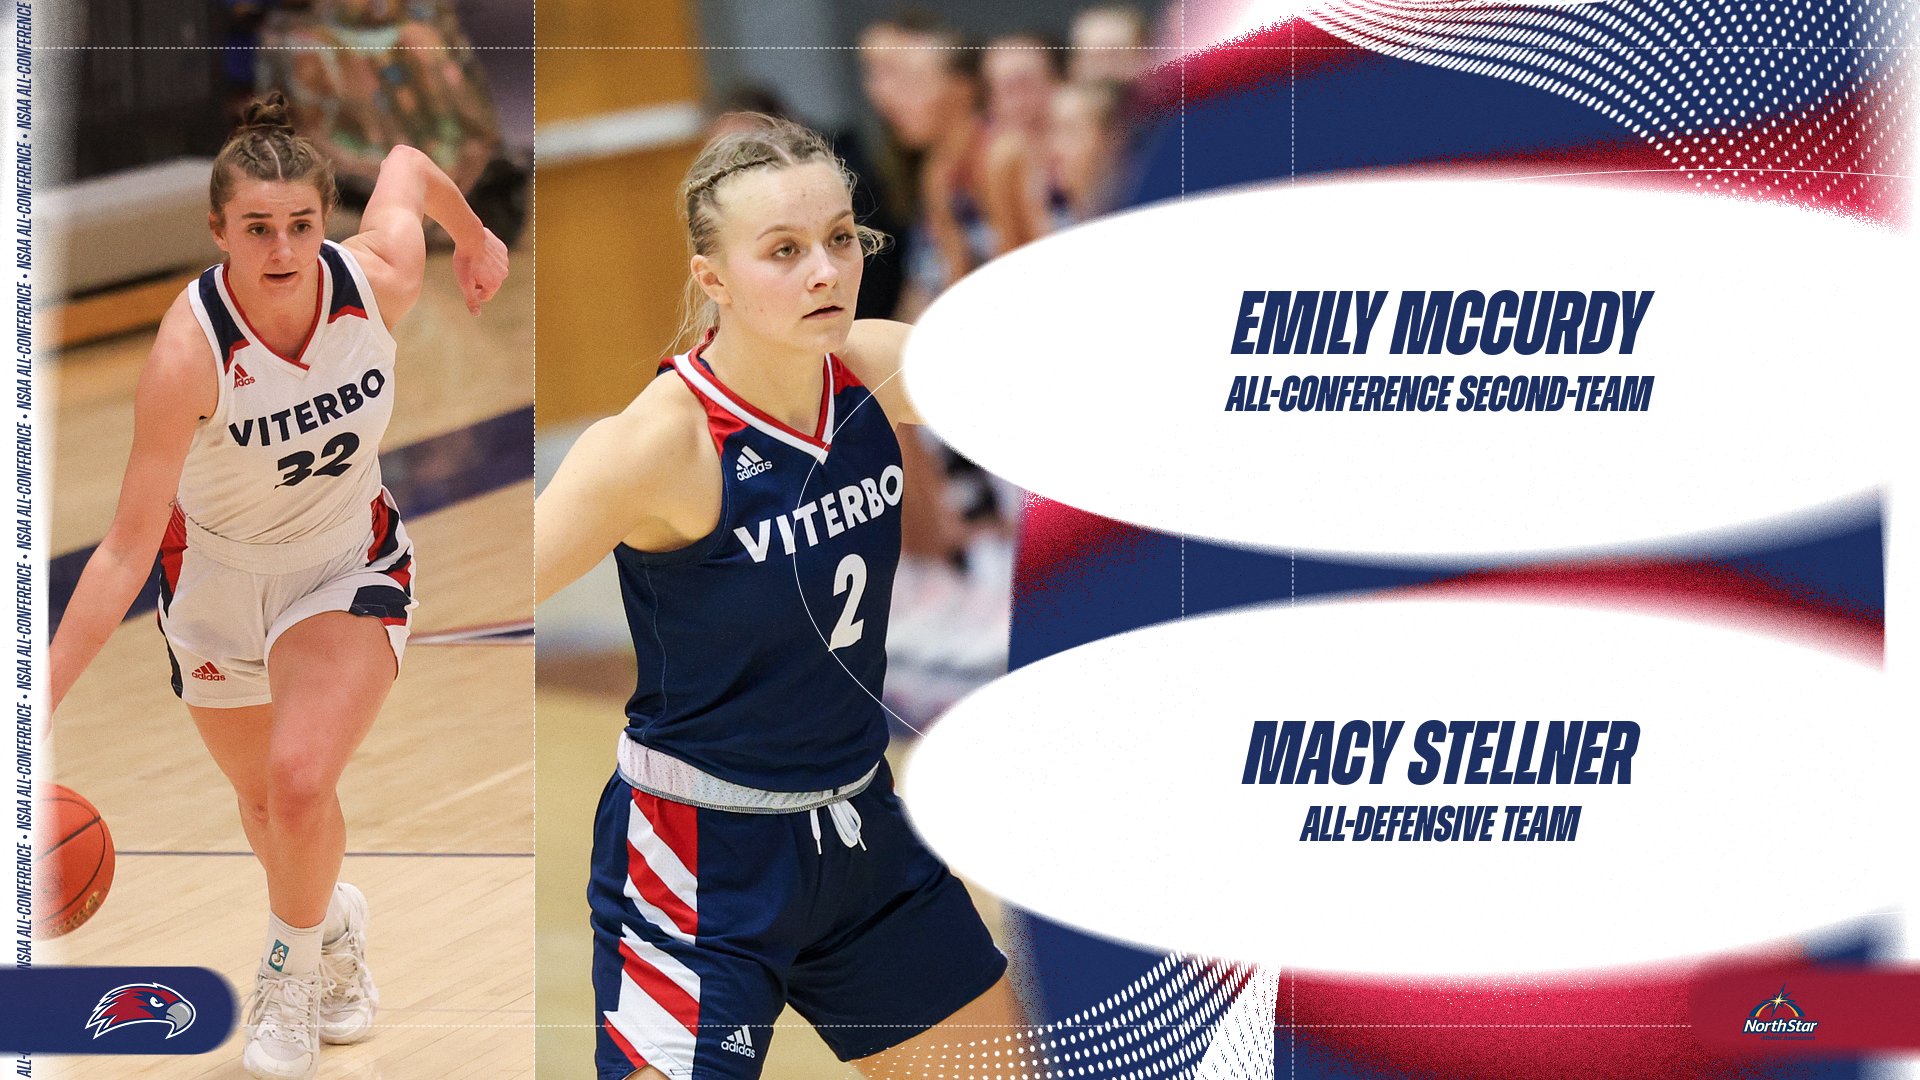 McCurdy, Stellner Selected to All-Conference Teams